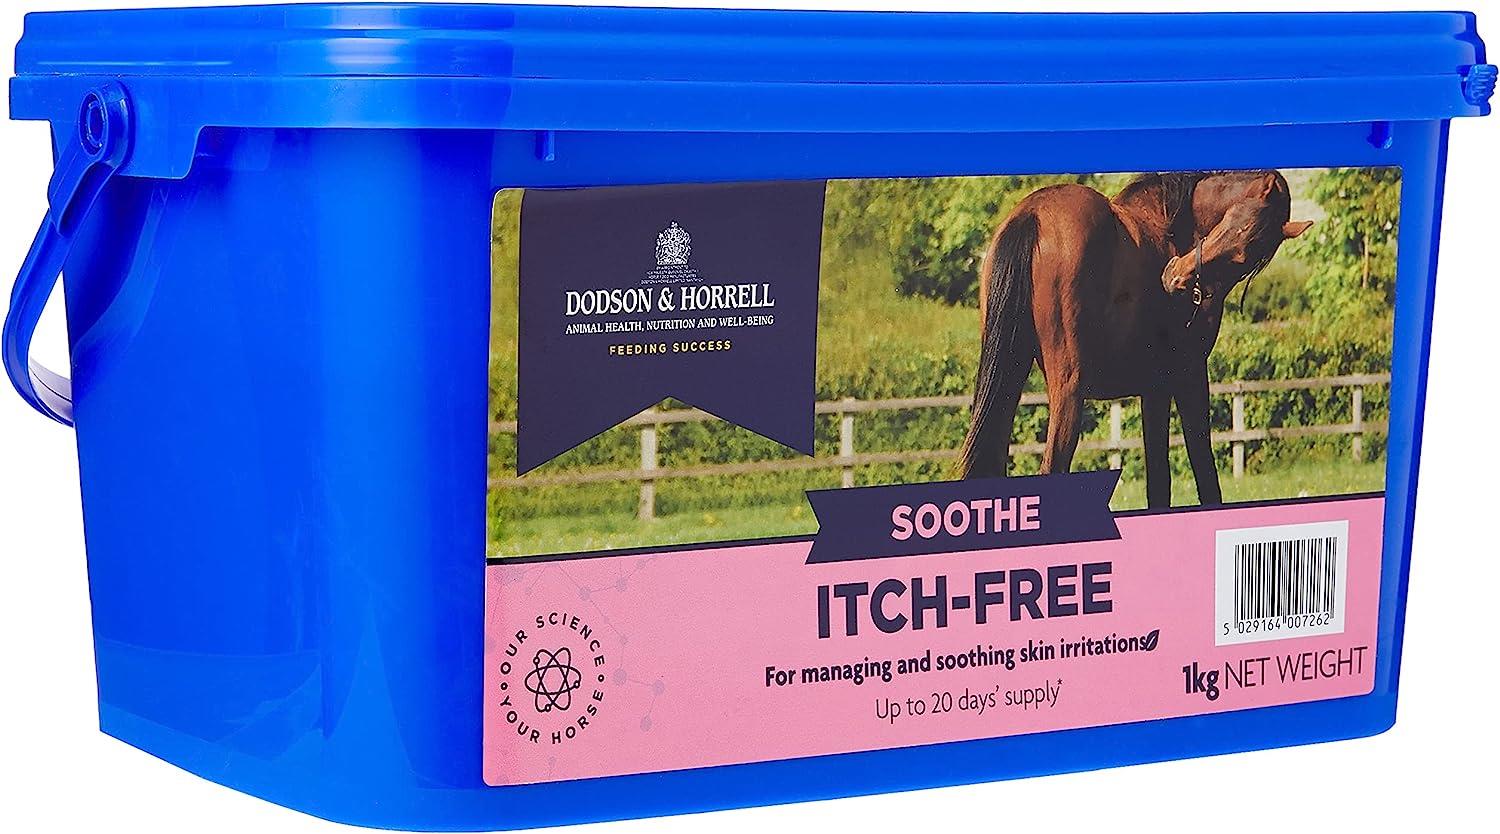 Dodson & Horrell Itch-Free for Horse Skin Health